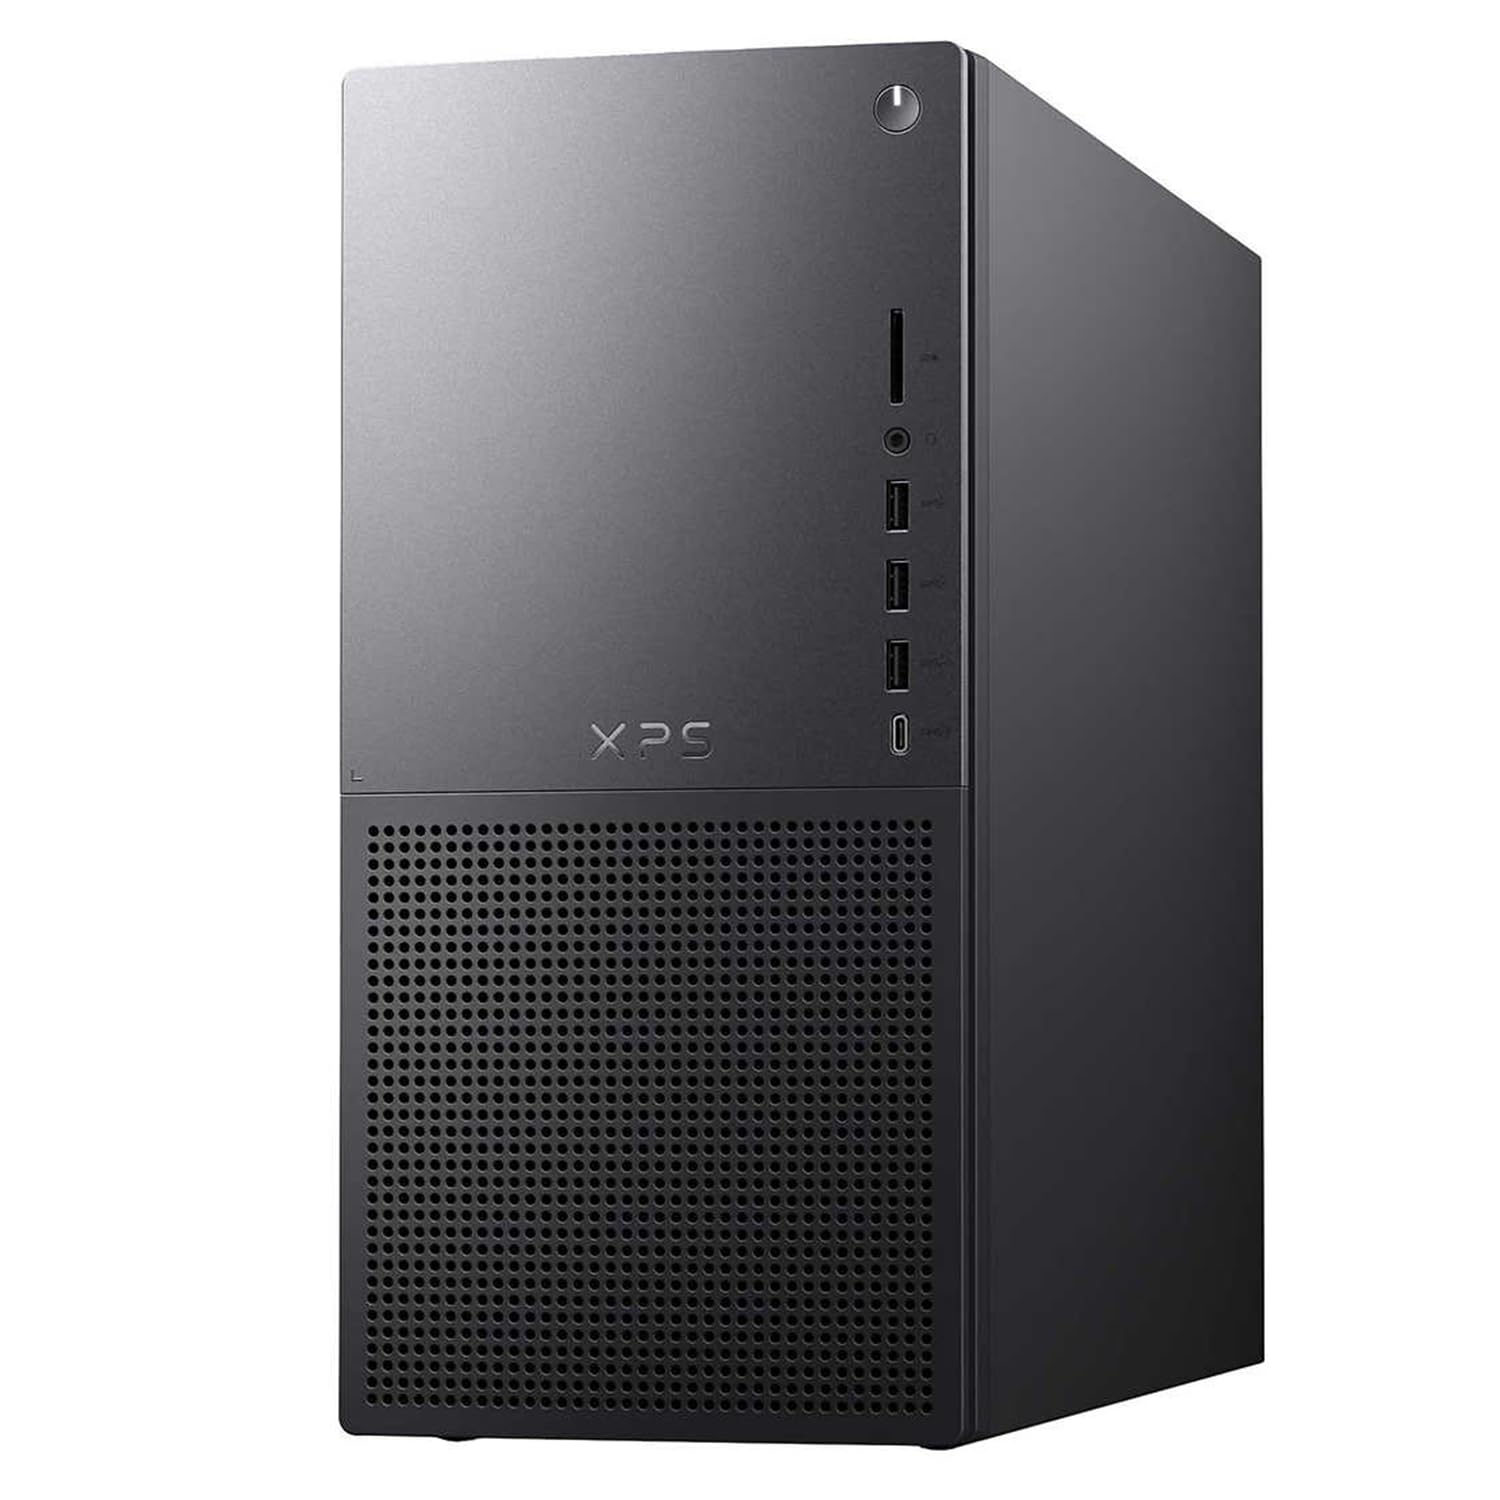 Dell Newest Business XPS 8960 Tower Desktop Computer, Intel Core i7-13700, 32GB DDR5 RAM, 1TB SSD, DisplayPort, Killer Wi-Fi 6, Wired Keyboard&Mouse, Windows 11 Pro